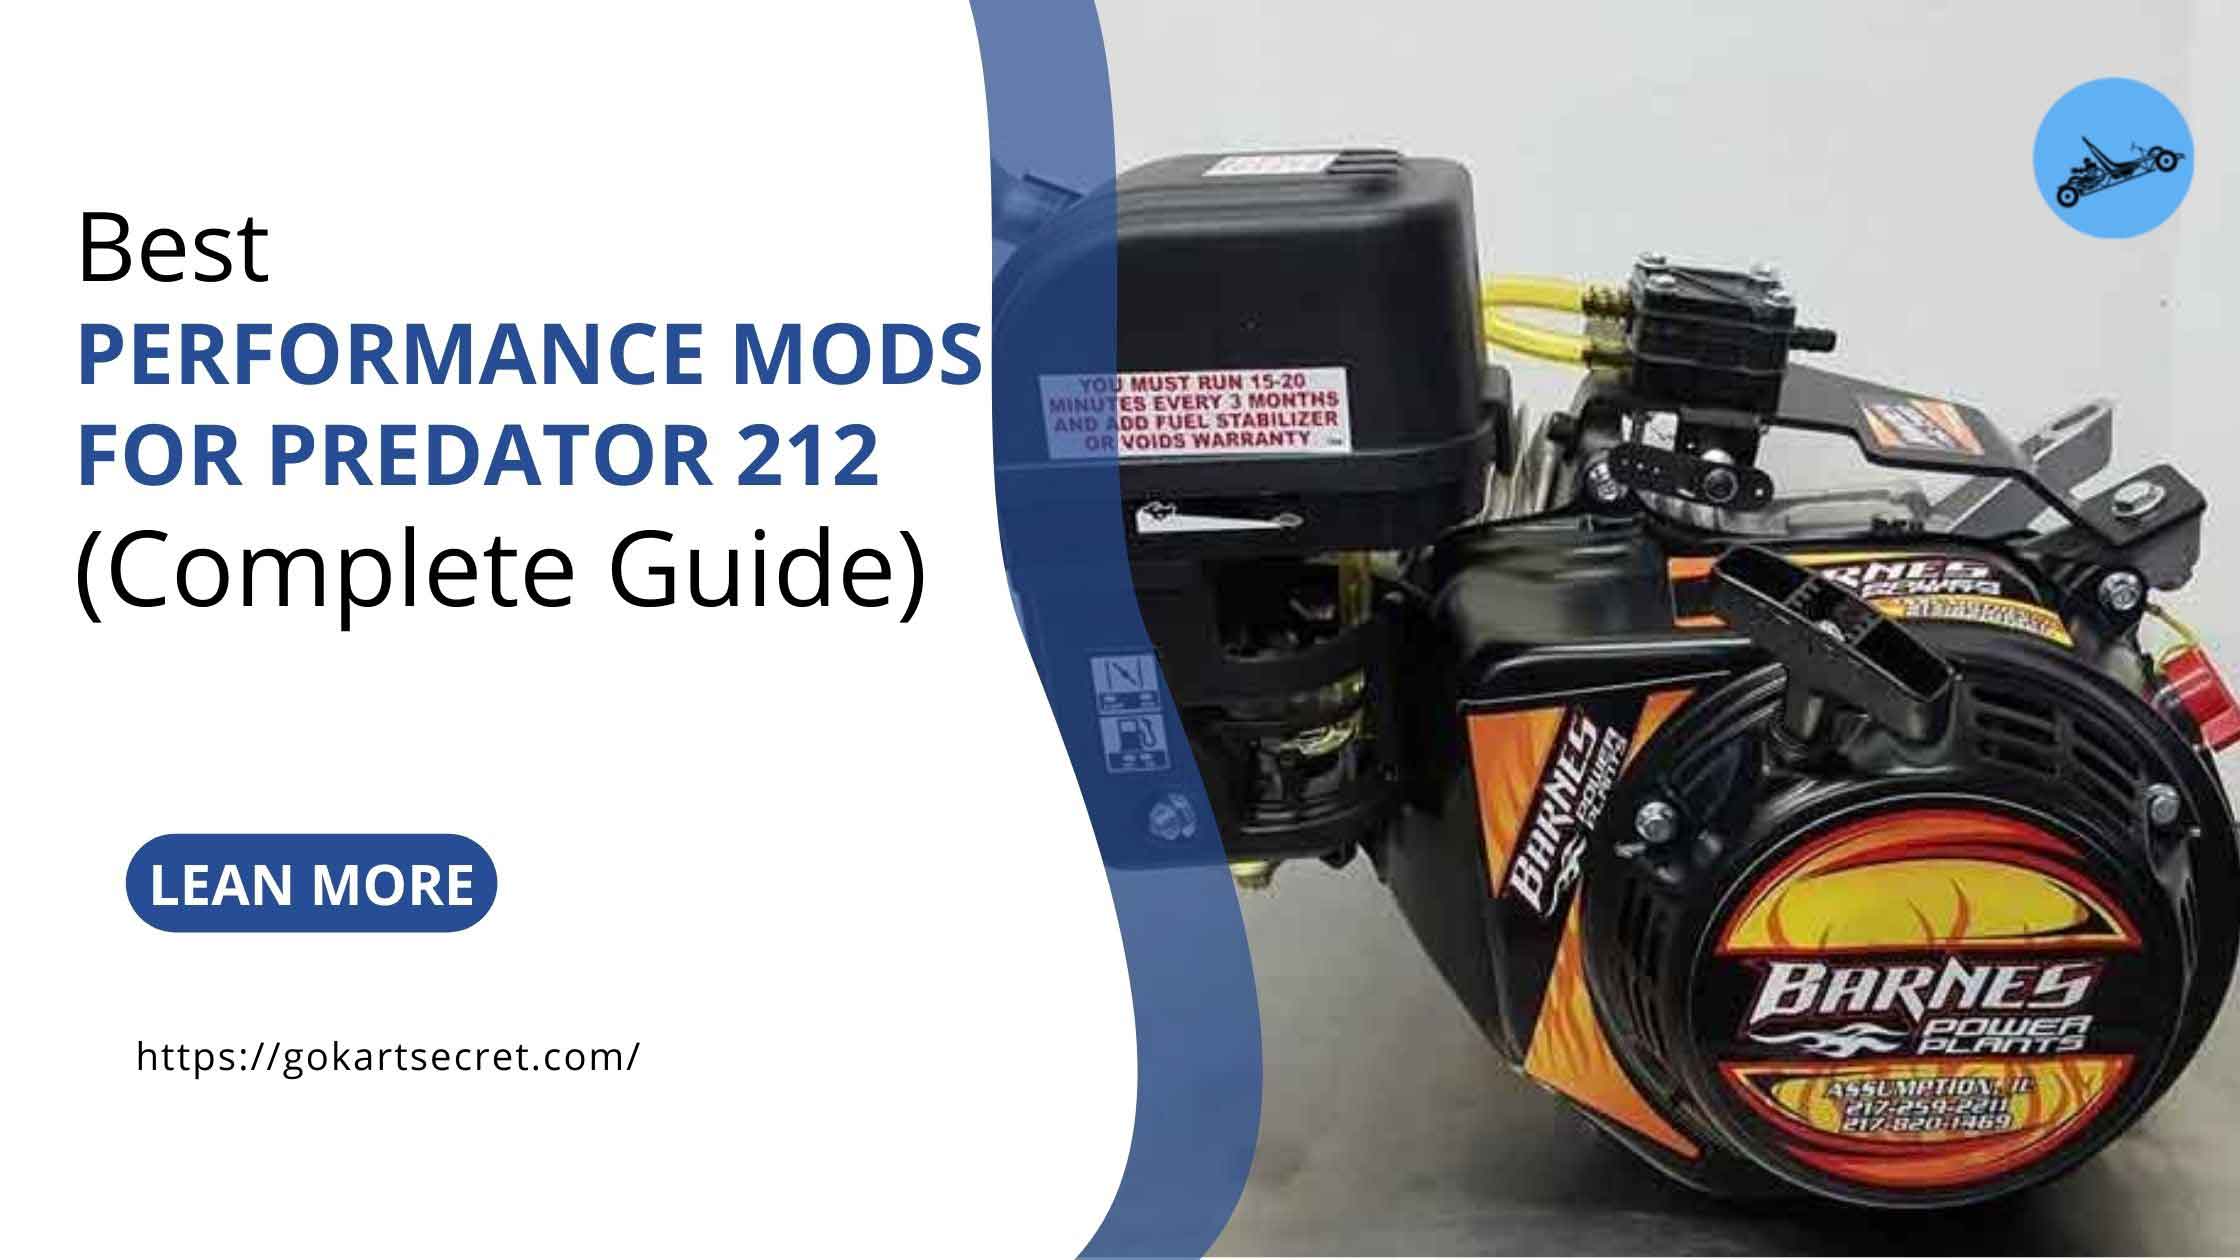 Best Performance Mods For Predator 212 (Complete Guide)